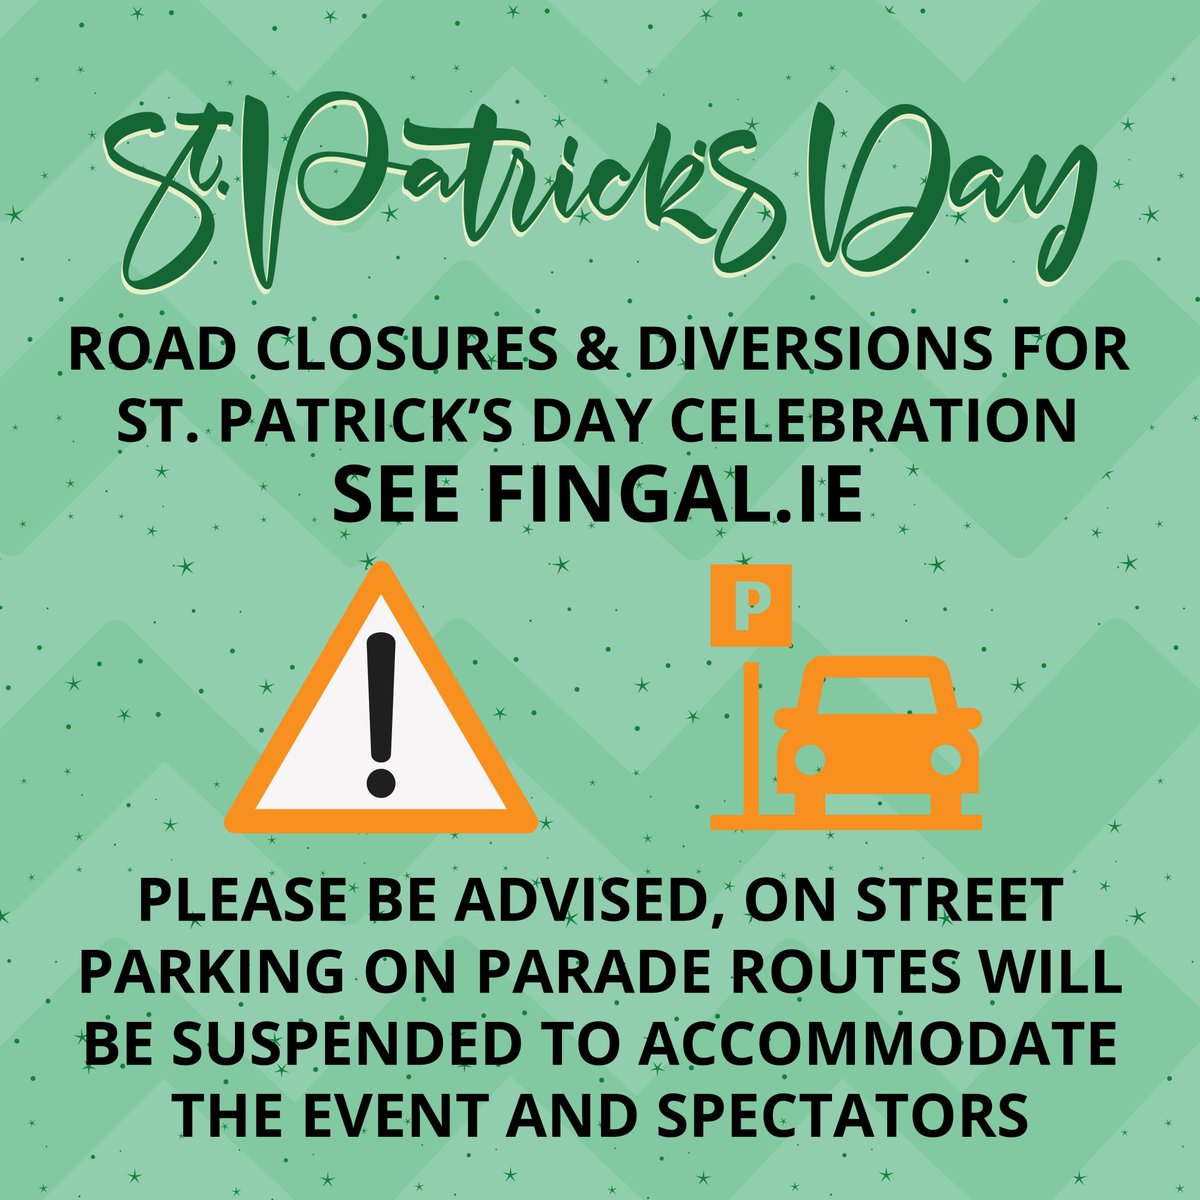 St Patrick's Day Notice: On-street parking will be suspended along parade routes to accommodate festivities and spectators! Please plan ahead for road closures starting March 16th to make way for celebrations. For alternative routes and diversions, see: fingal.ie/events/st-patr…